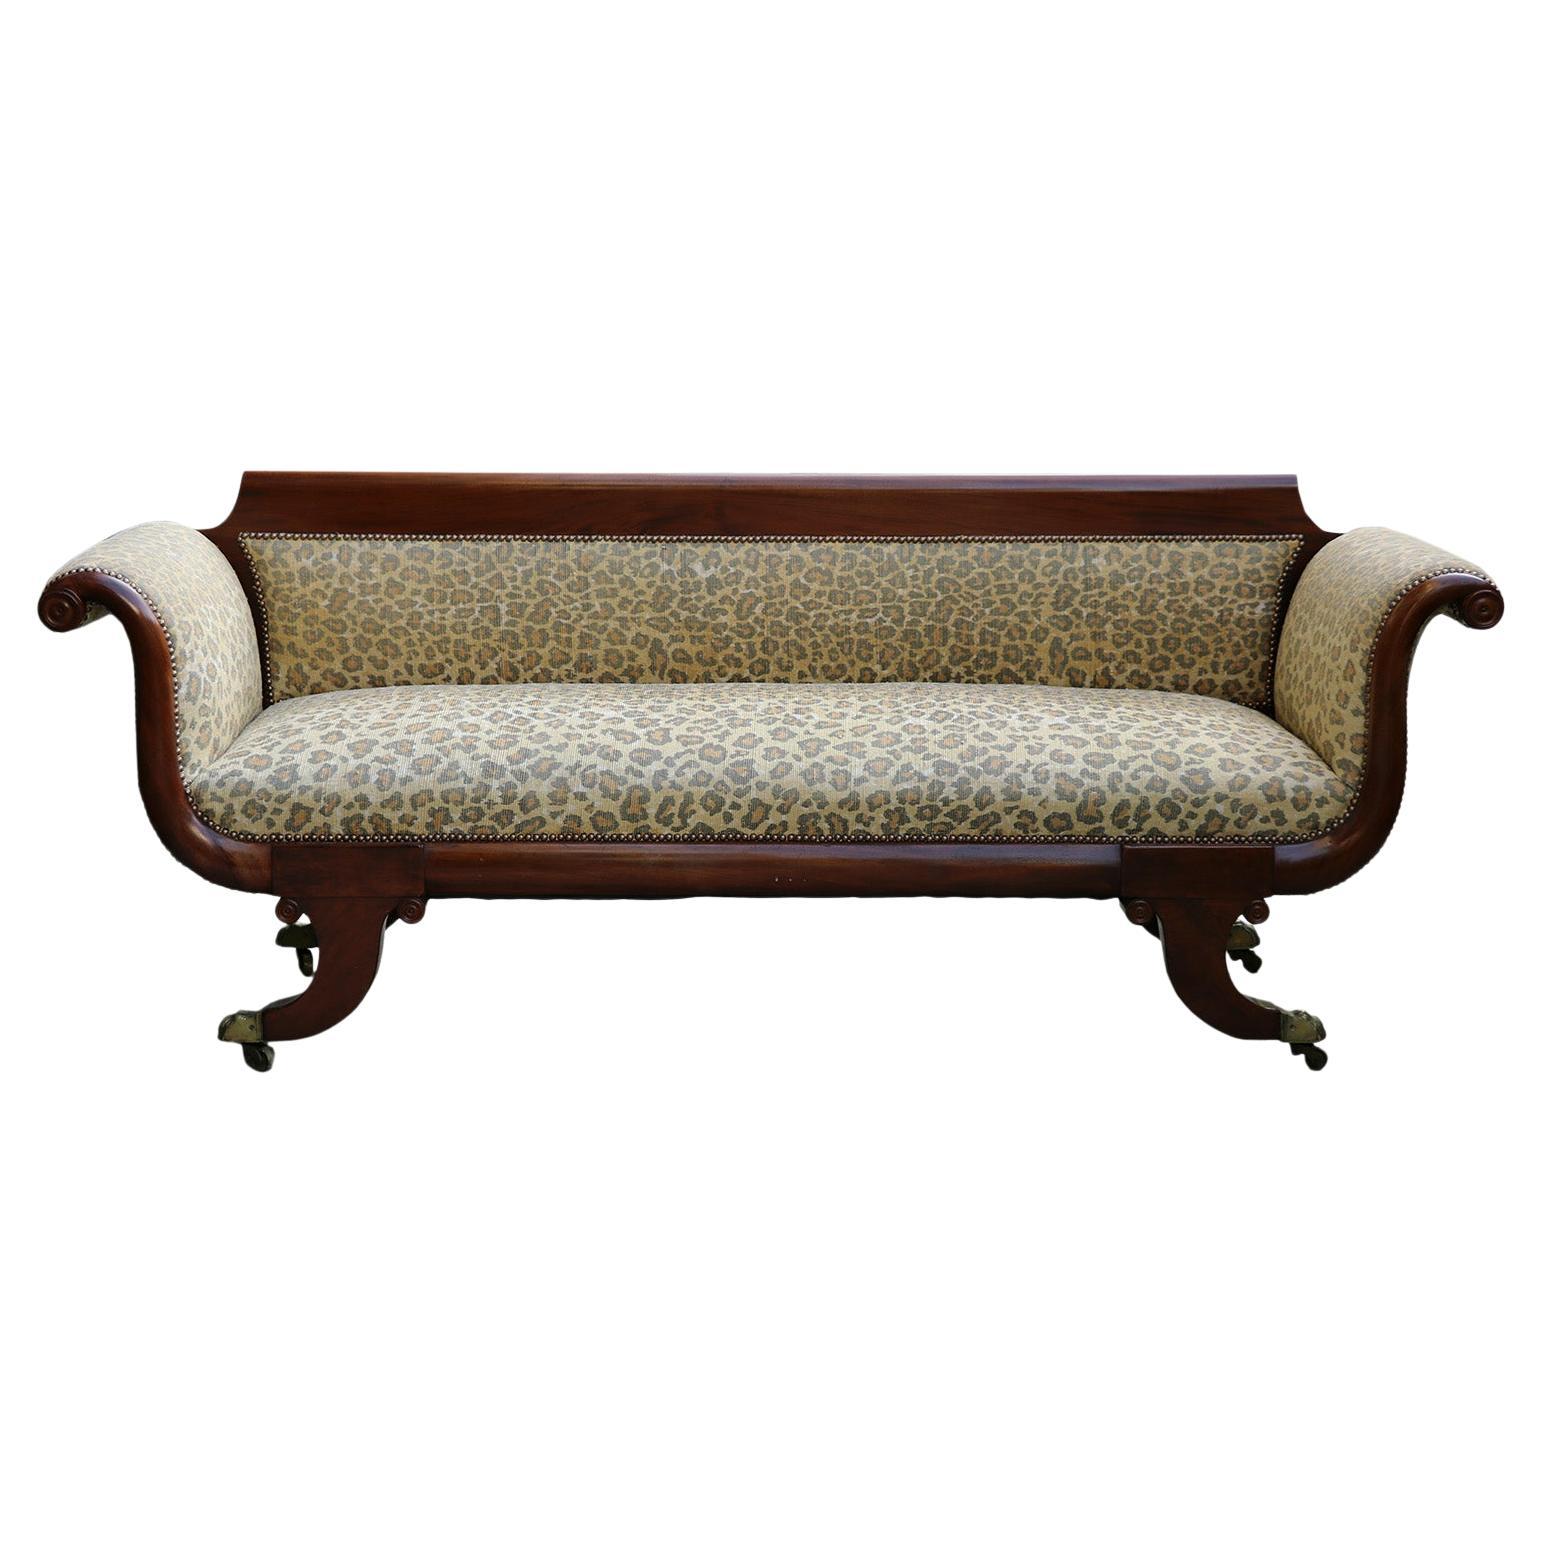 Vintage Animal Pattern Chaise Lounge For Sale